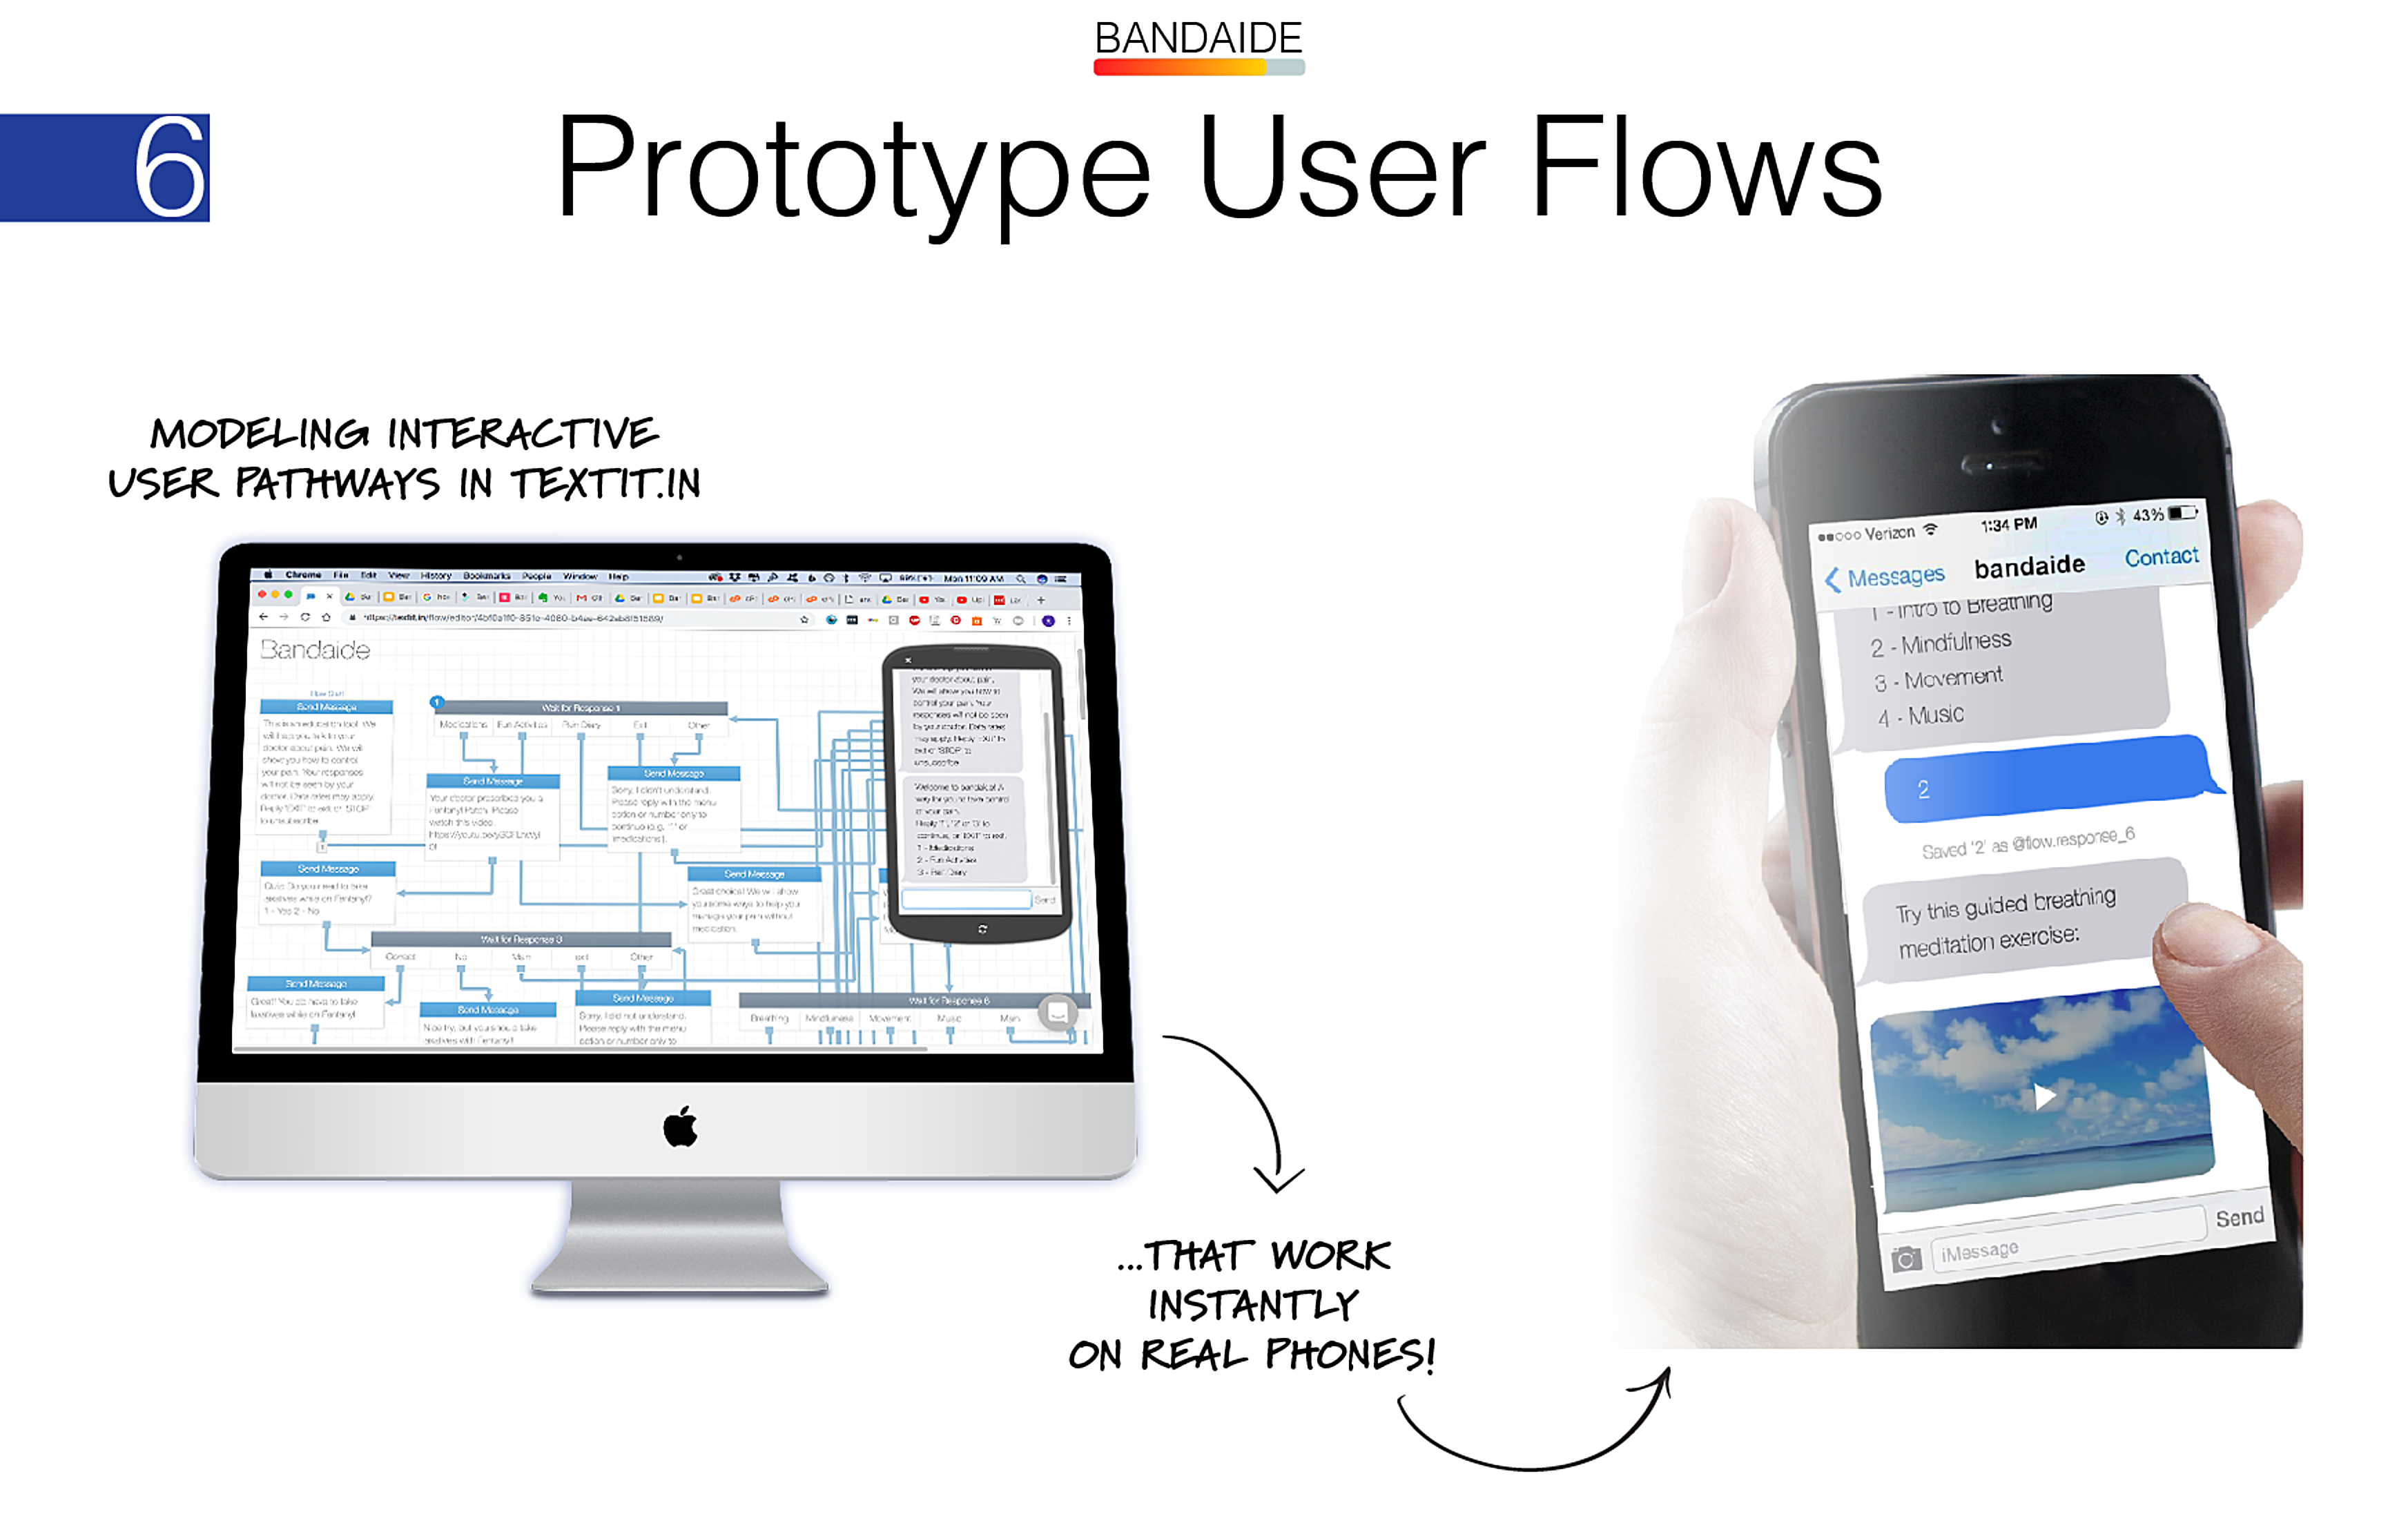 prototyping user flows by building an interactive chatbot prototype using textit.in